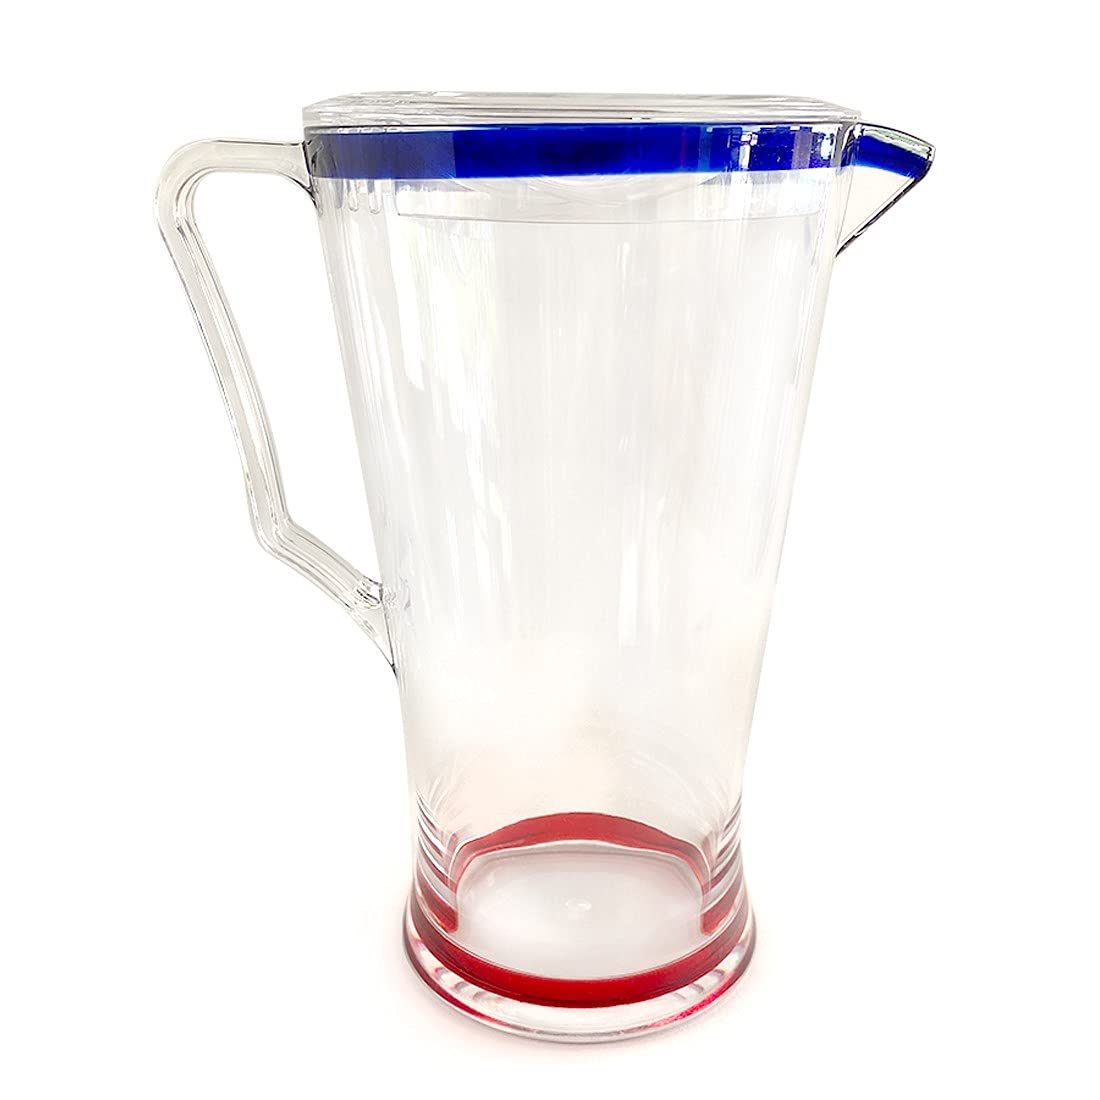 Lily's Home Shatterproof Plastic Pitcher with Color Rim, the Large Capacity Makes it Excellent for Parties, Both Indoor and Outdoor, Clear 100 Ounces (Pitcher Only)